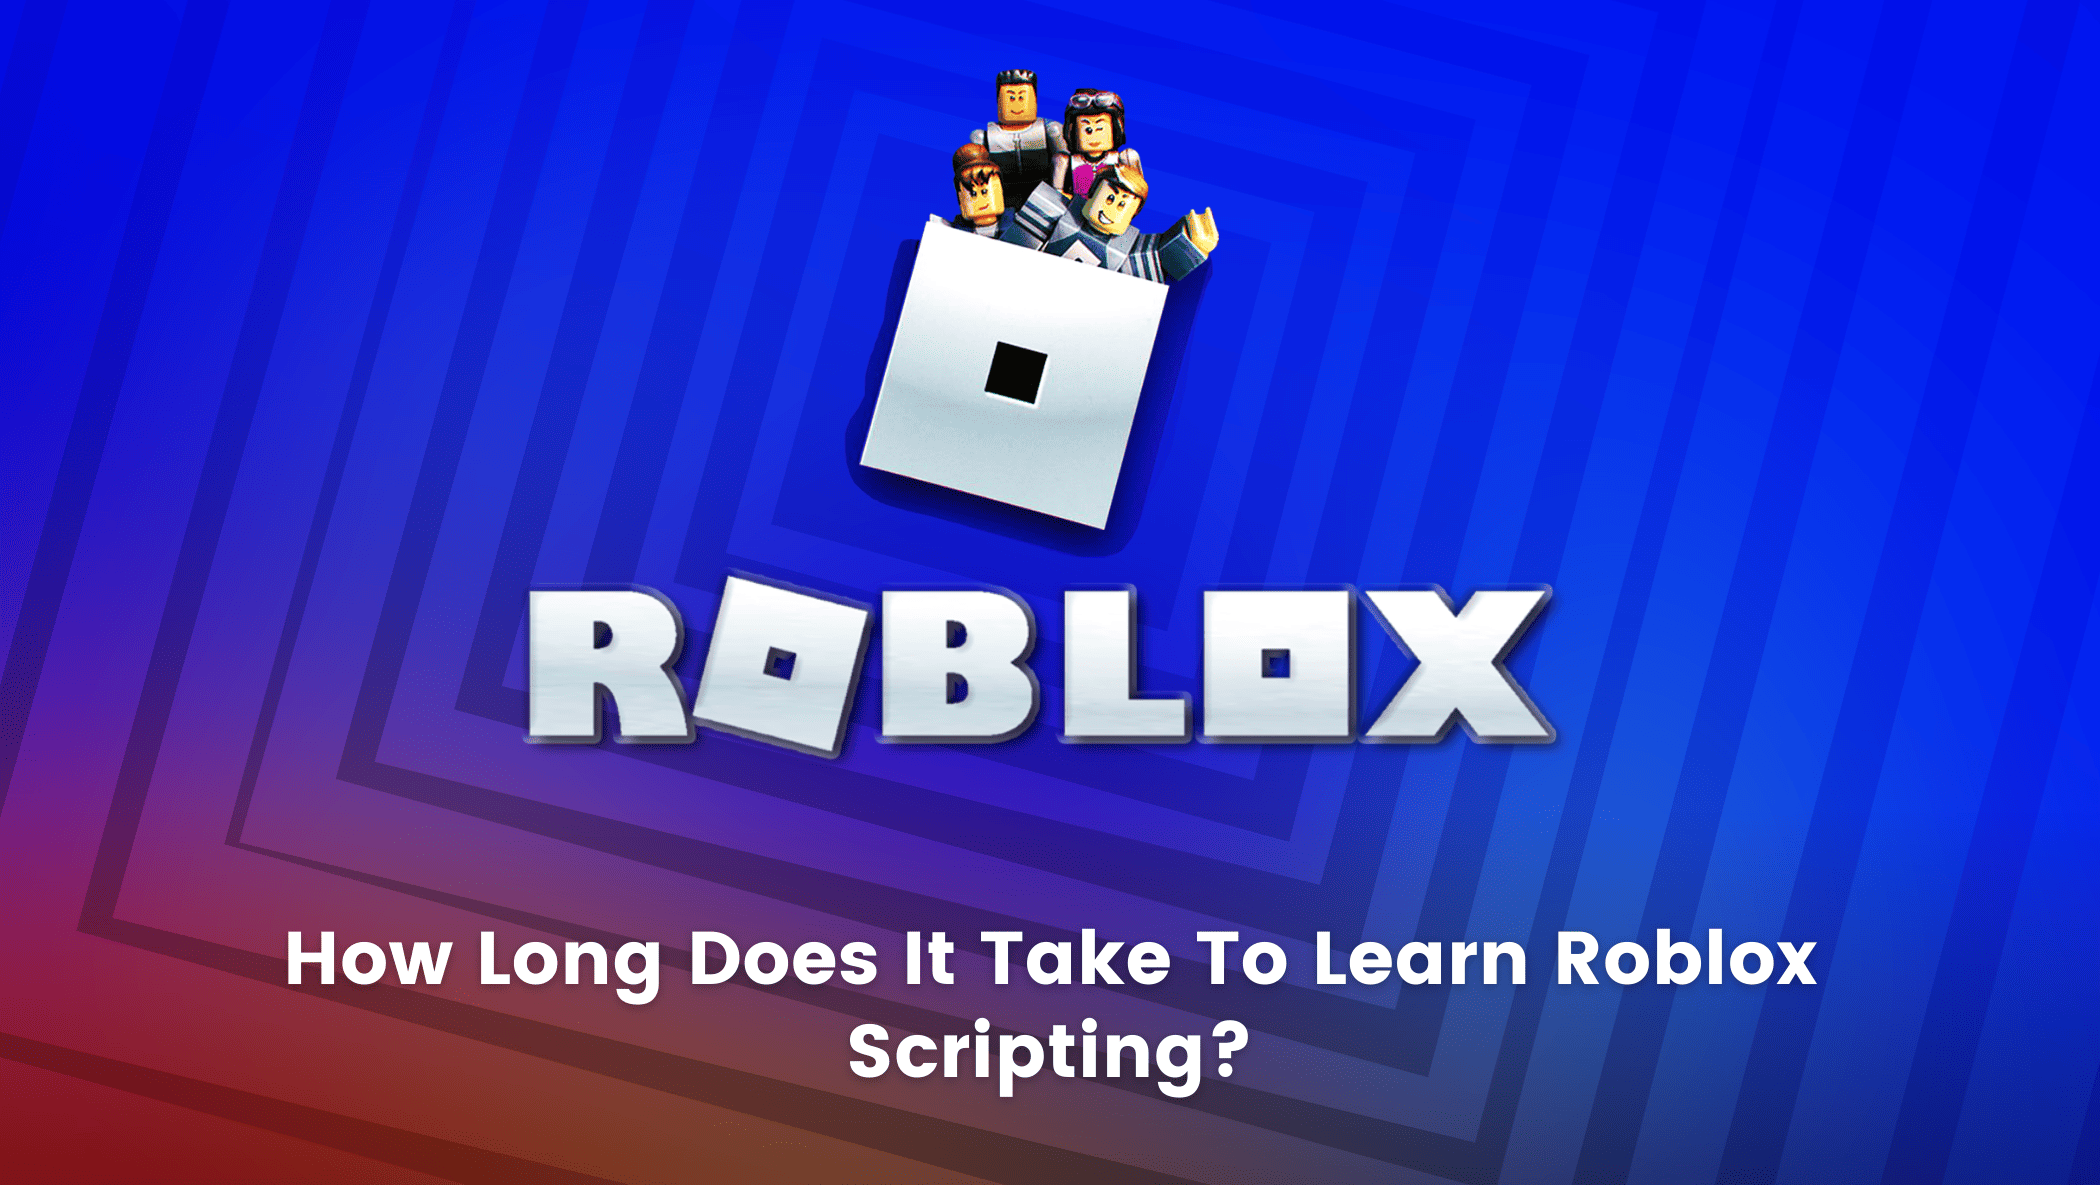 How Long Does It Take To Learn Roblox Scripting?